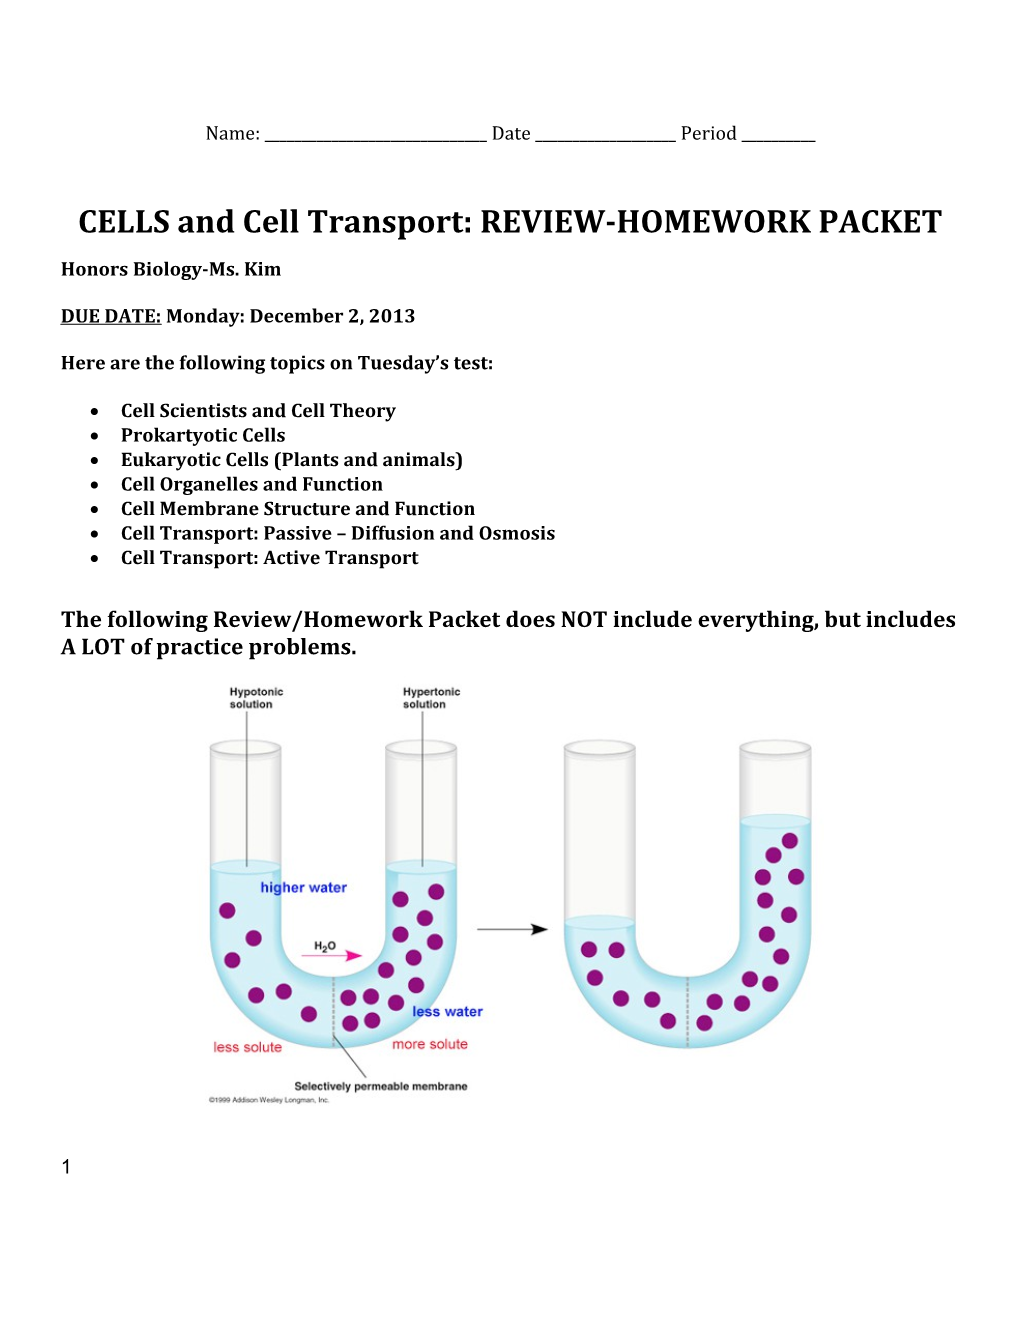 CELLS and Cell Transport: REVIEW-HOMEWORK PACKET